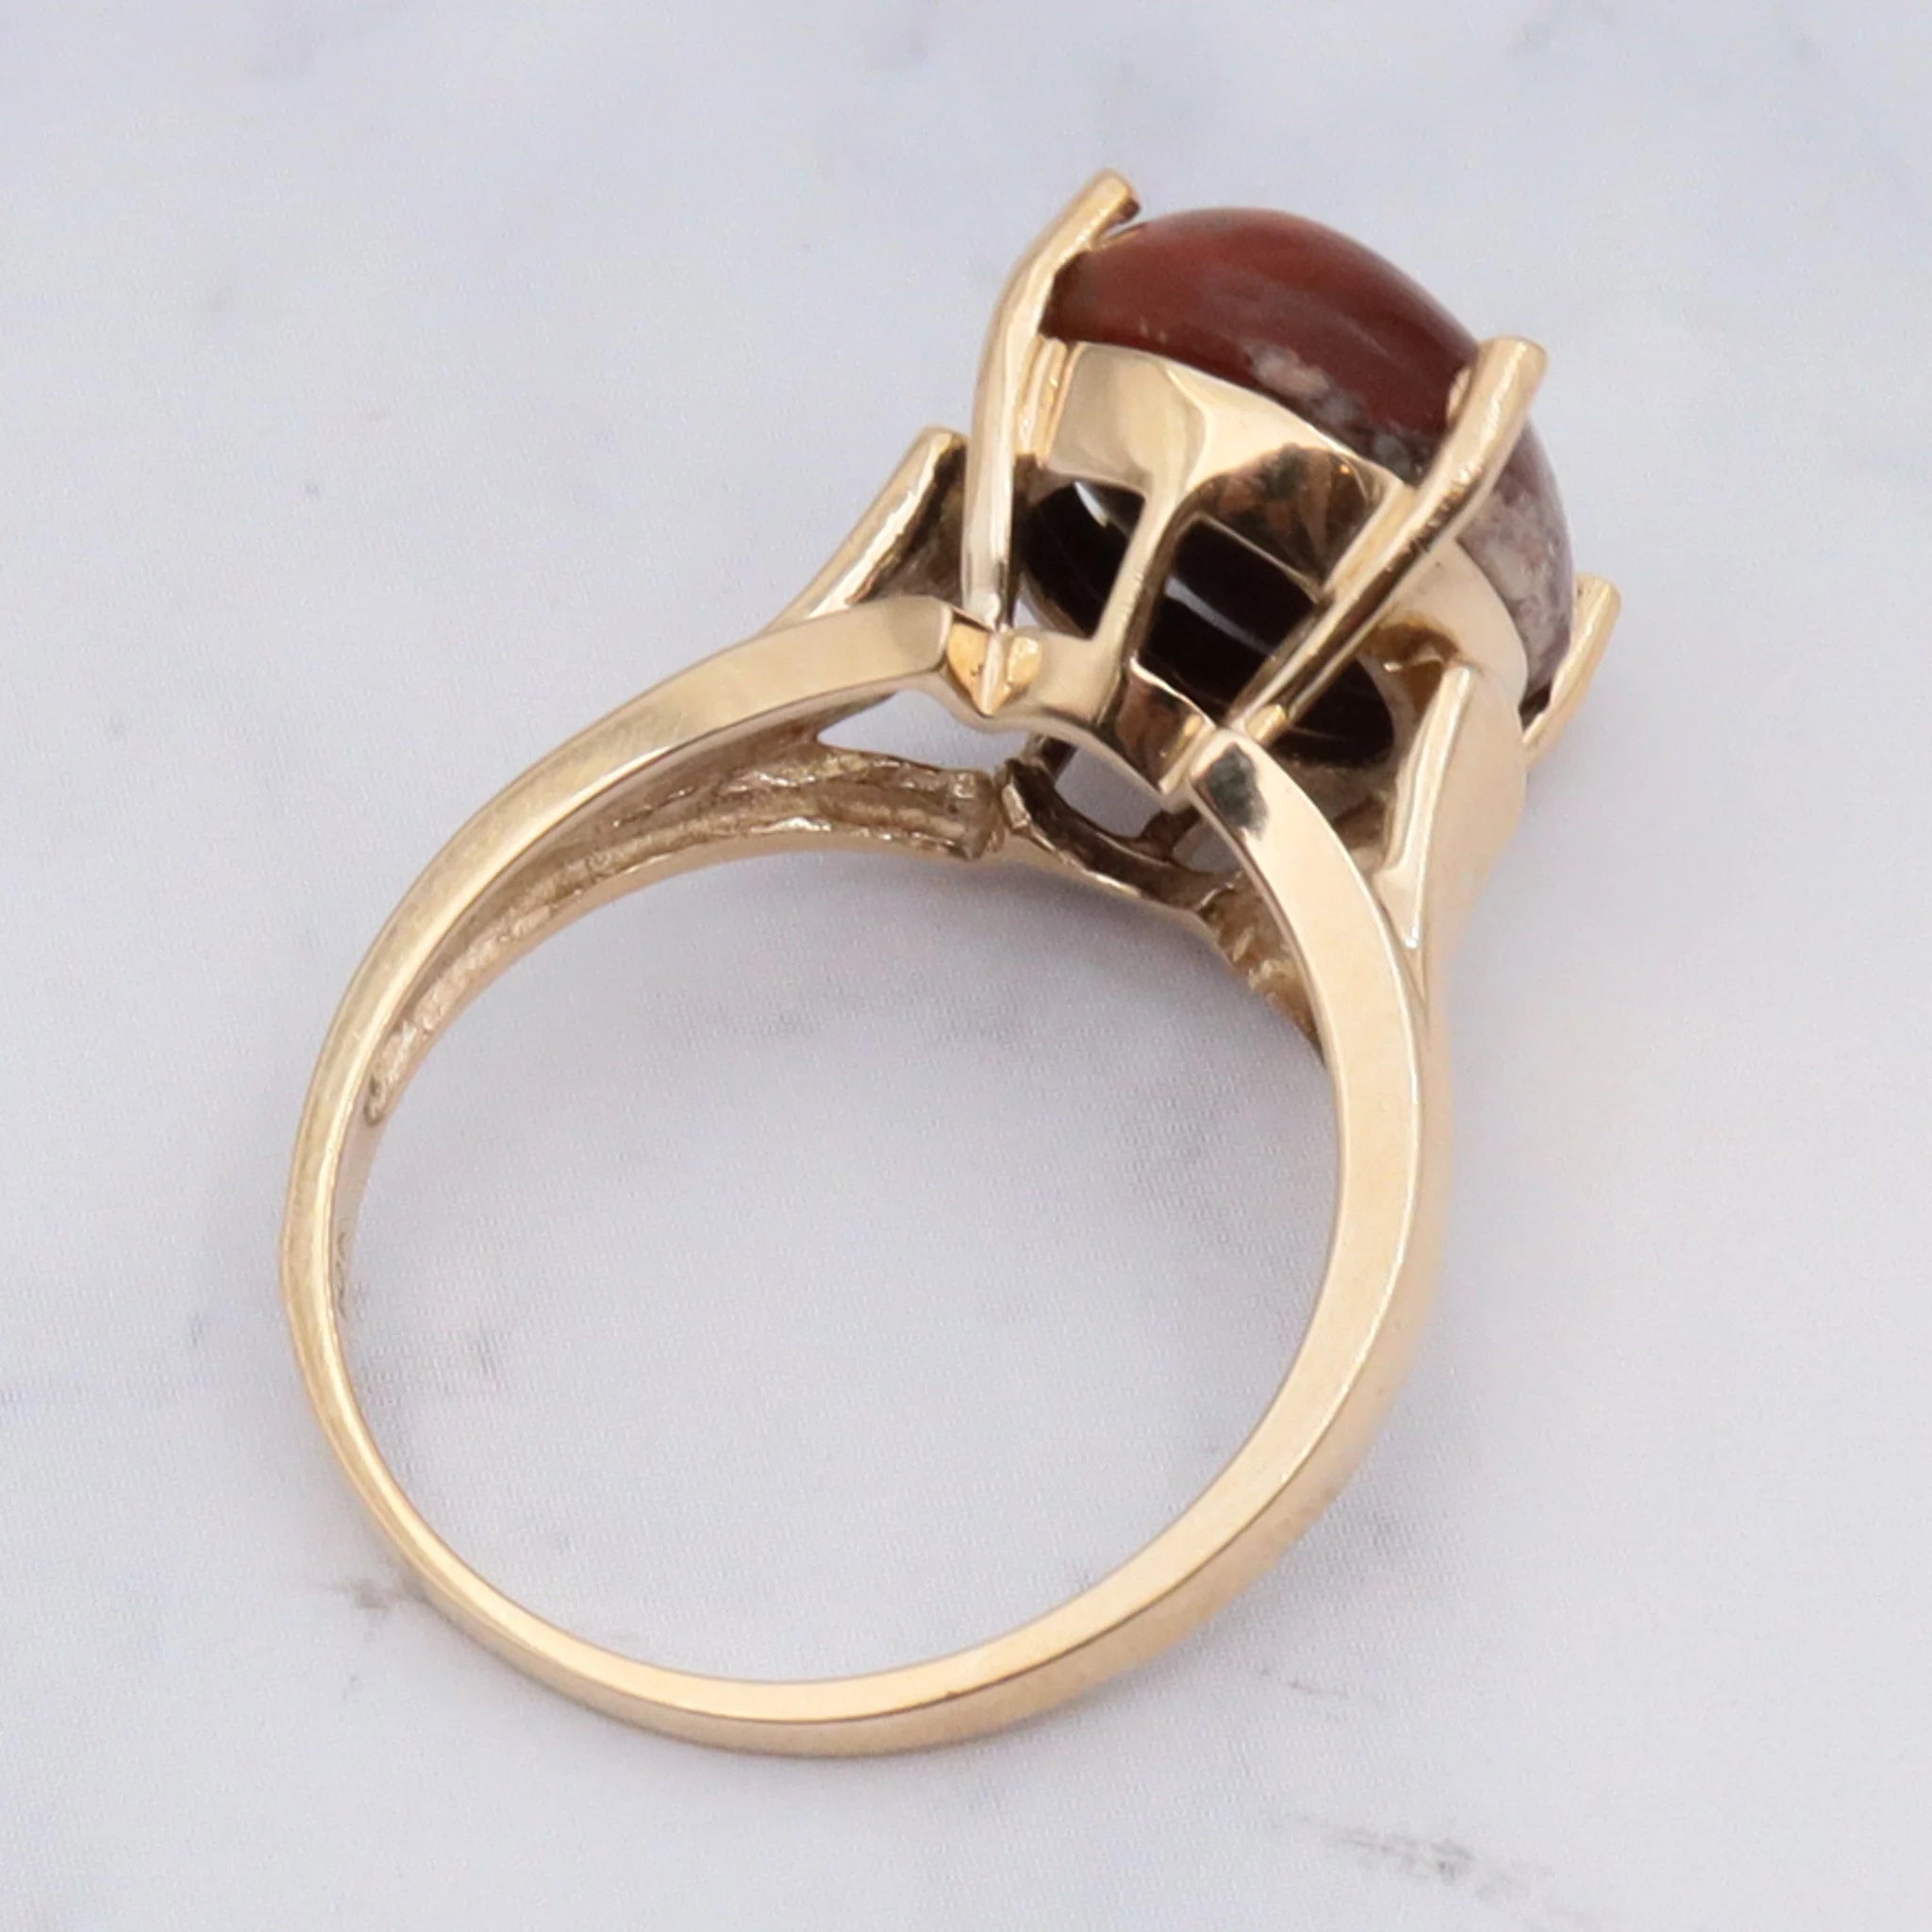 Vintage 10K Gold Mexican Fire Opal with Matrix Ring - Size 5 3/4